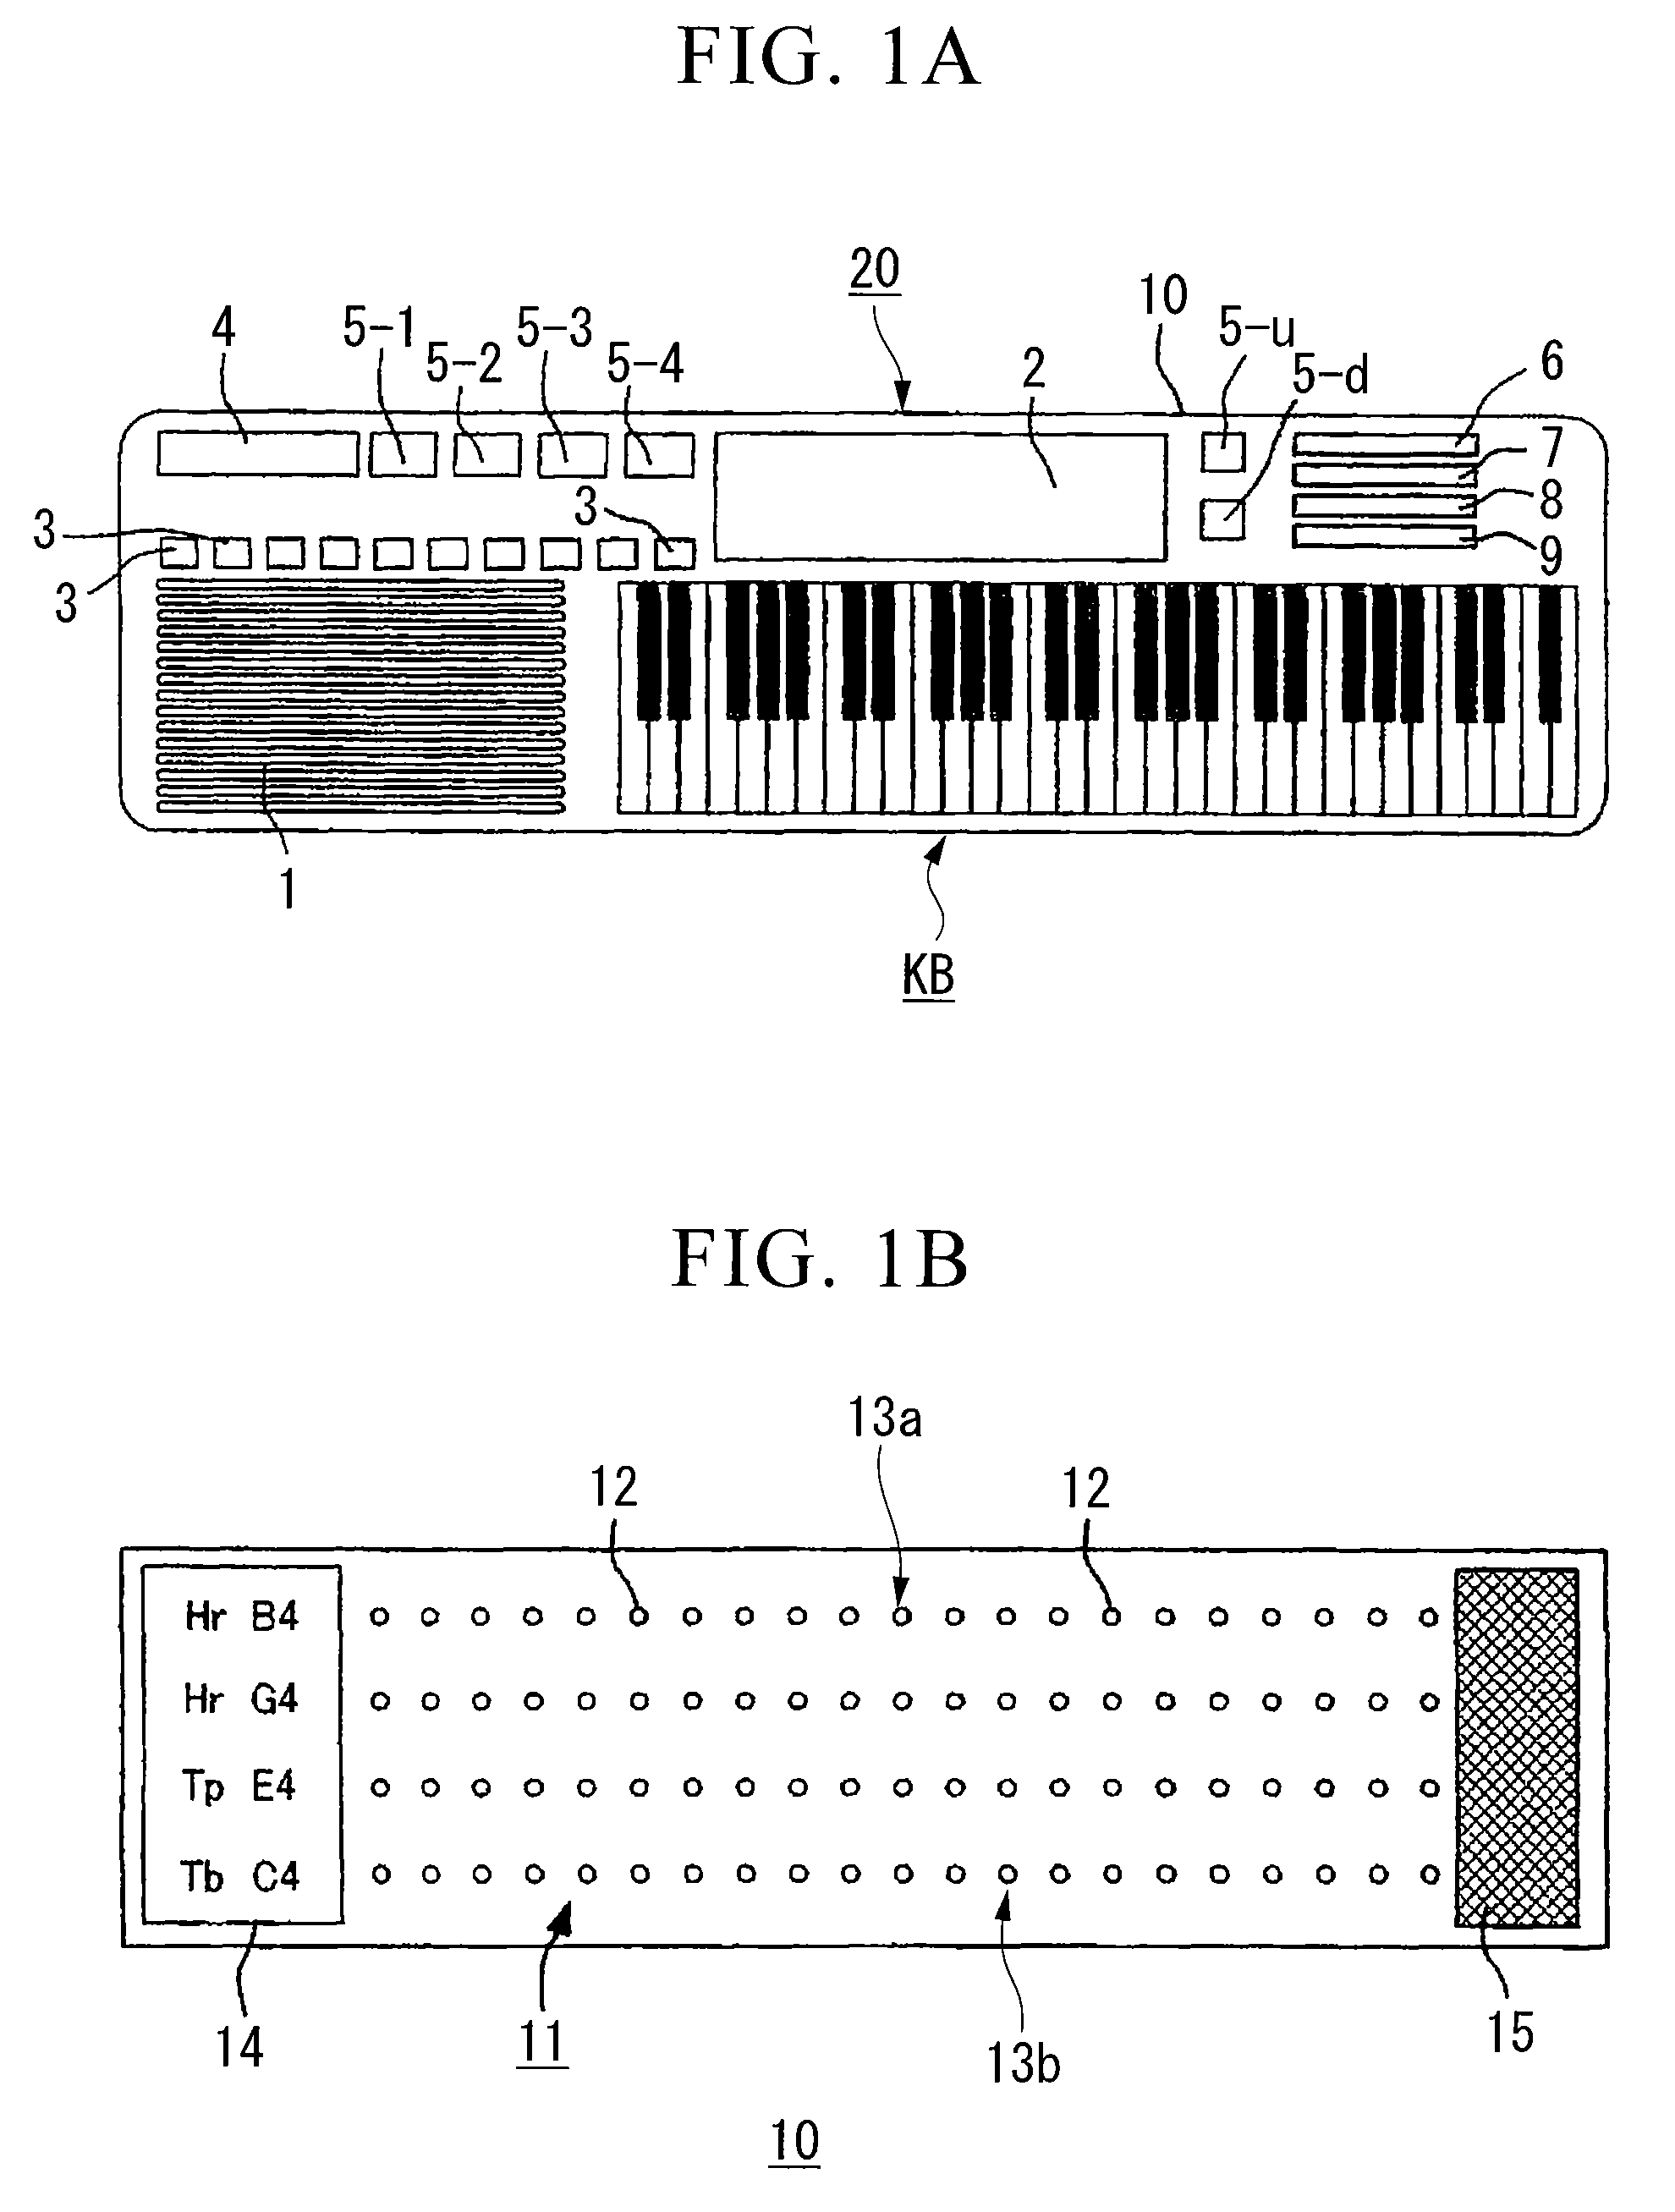 Electronic musical instrument having tuning device